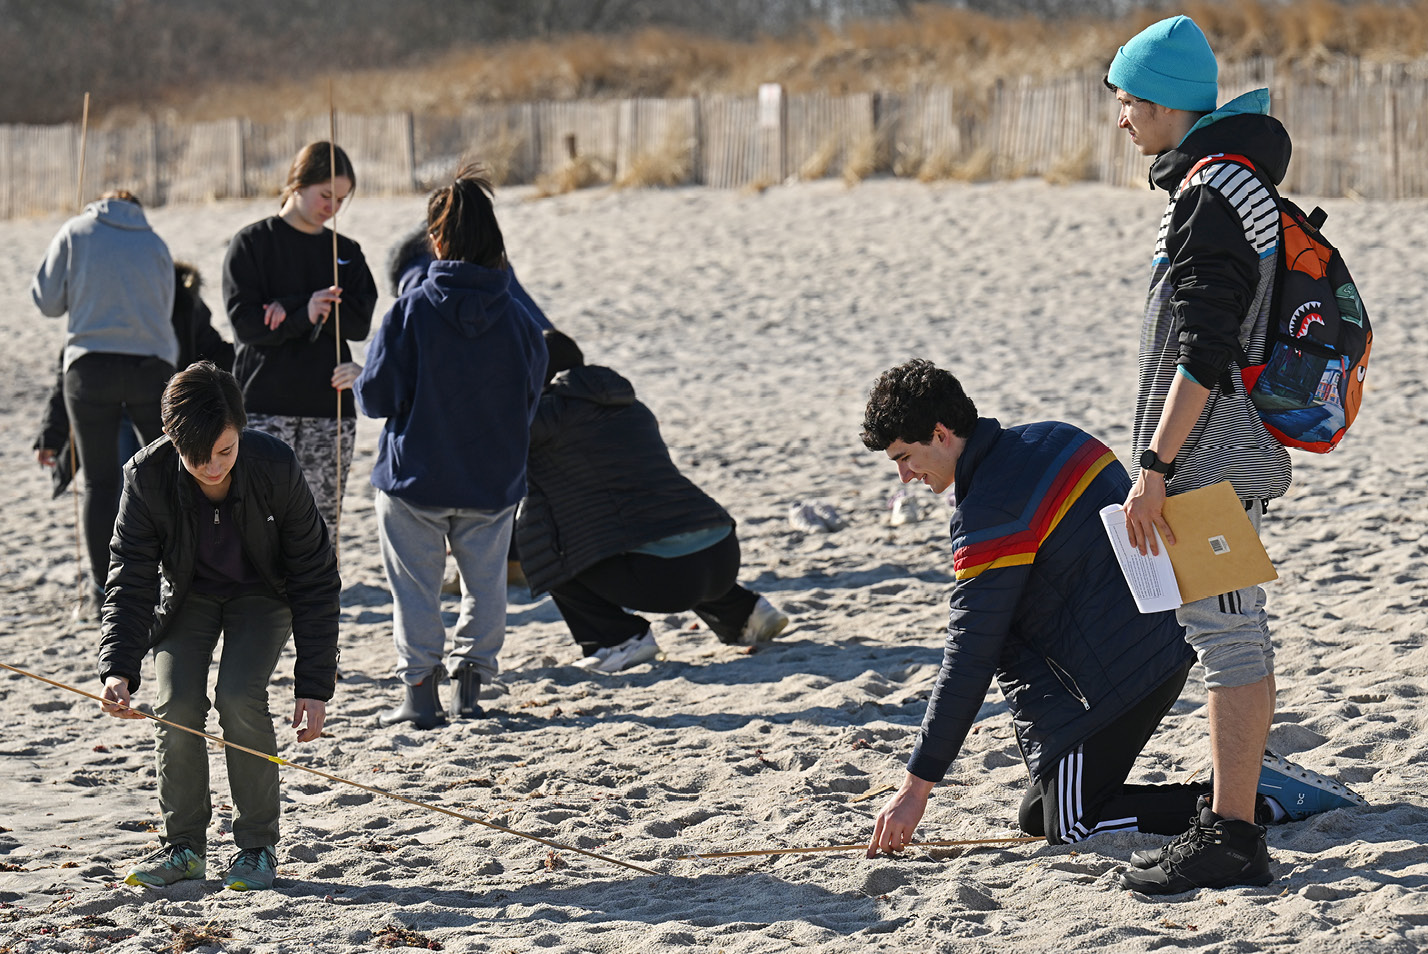 Abigail Haan ’26, Jamie Sussman ’26, and Kian Miranda-Rodriguez ’26 take measurements along a transect on Waterford Beach. This was the first off-campus outing for the class comprised entirely of first-year students interested in studying biology.